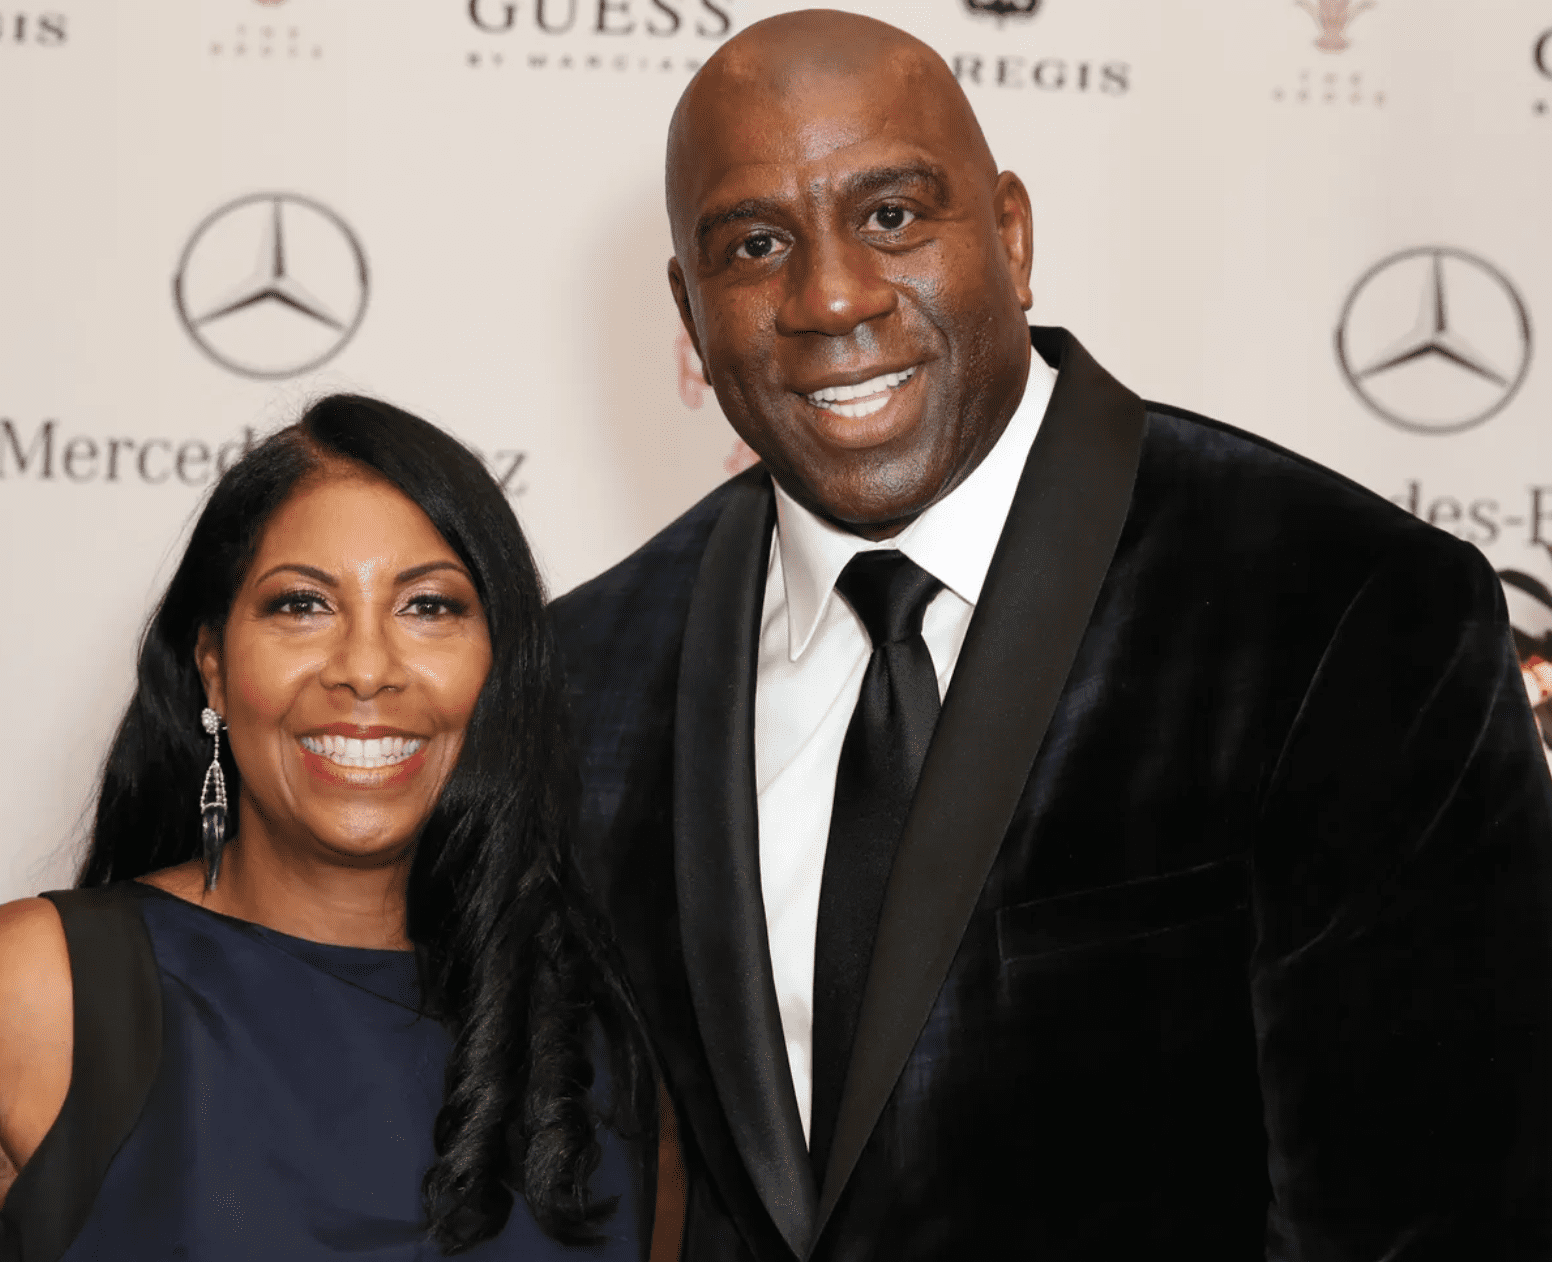 Magic Johnson and wife Cookie Johnson arrive at the 2014 Carousel of Hope Ball presented by Mercedes-Benz on October 11, 2014. | Source: Getty Images